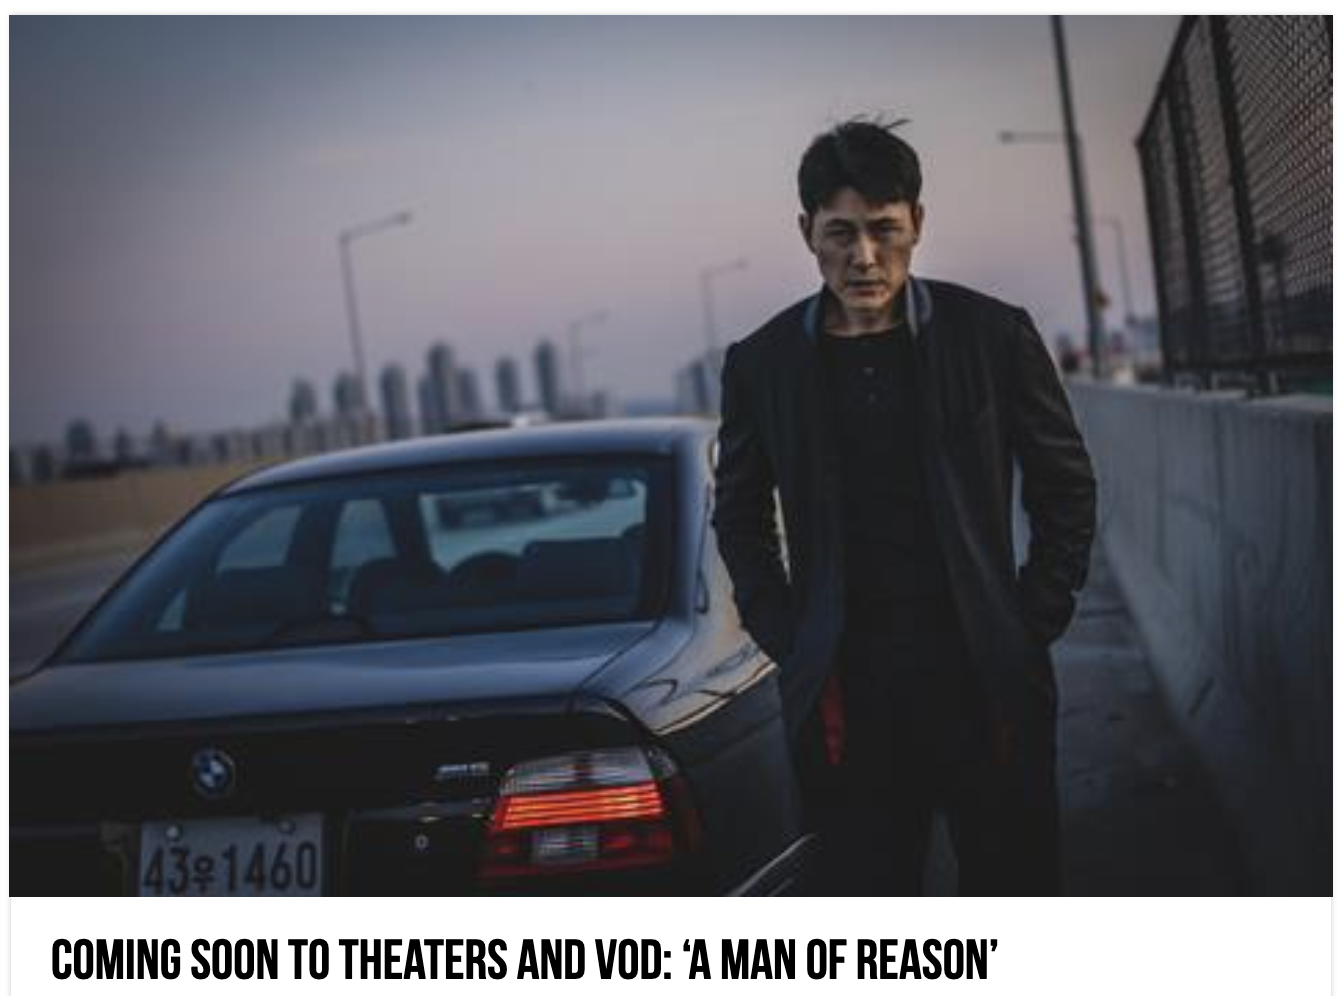 Coming Soon To Theaters And VOD: ‘A MAN OF REASON’